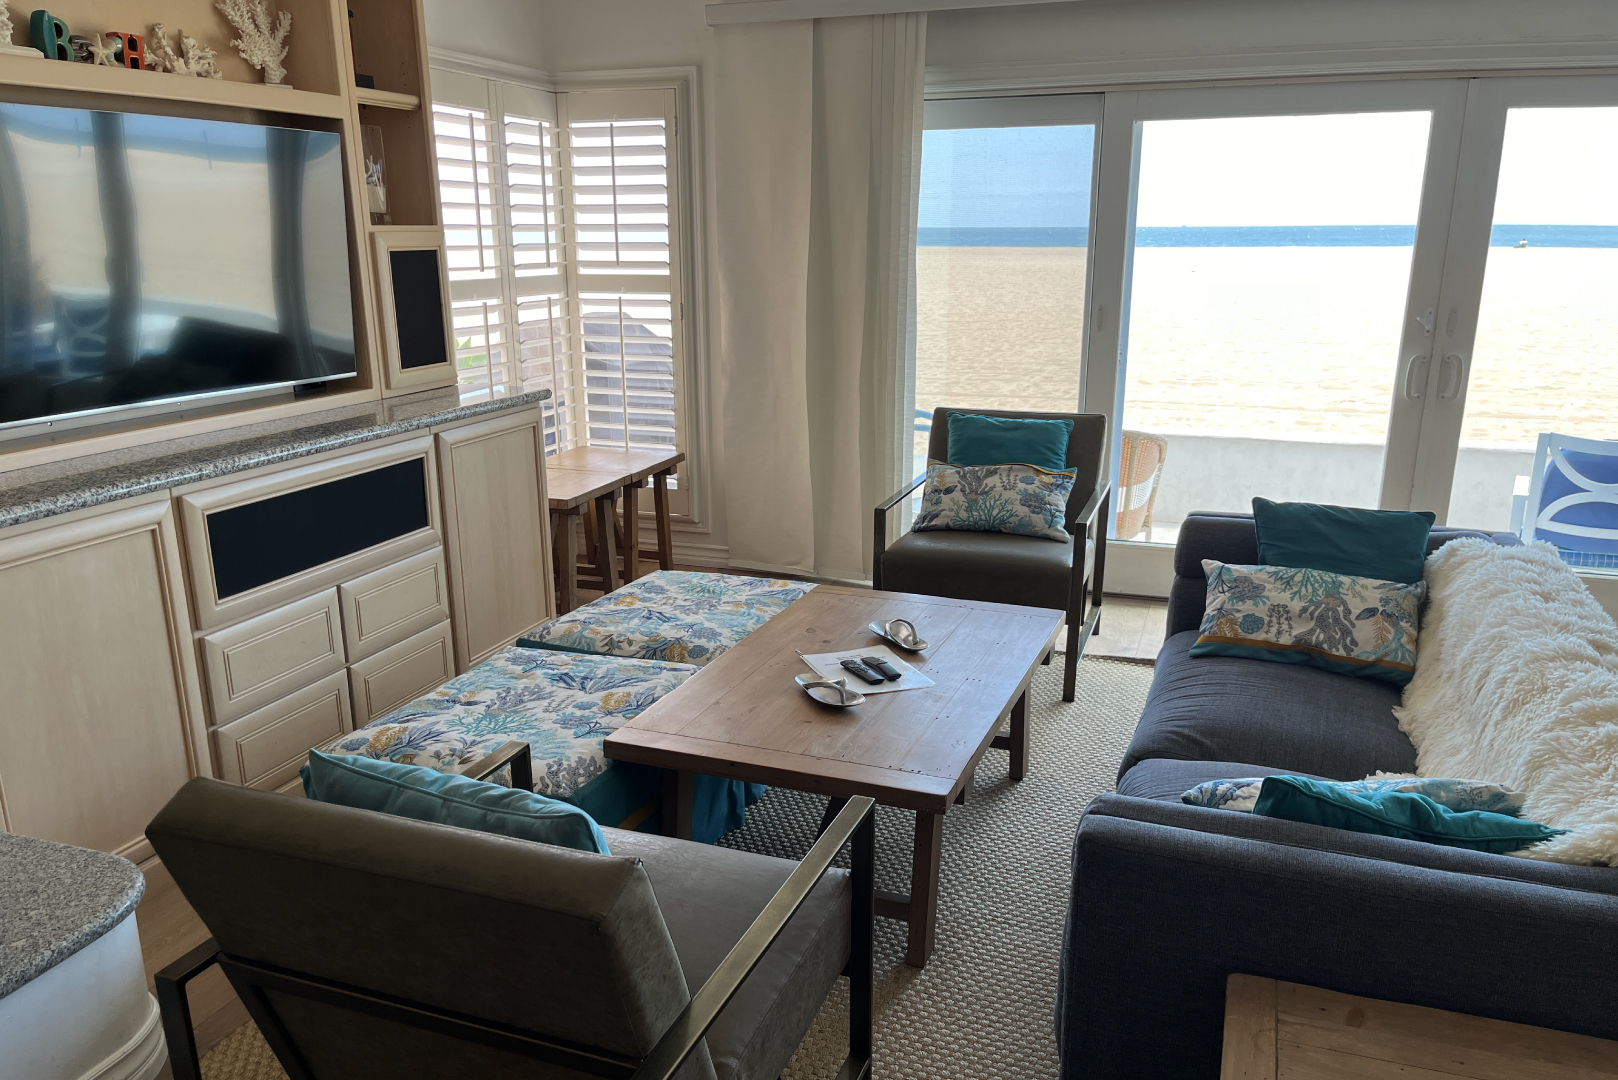 A view of the living room area looking towards the beach